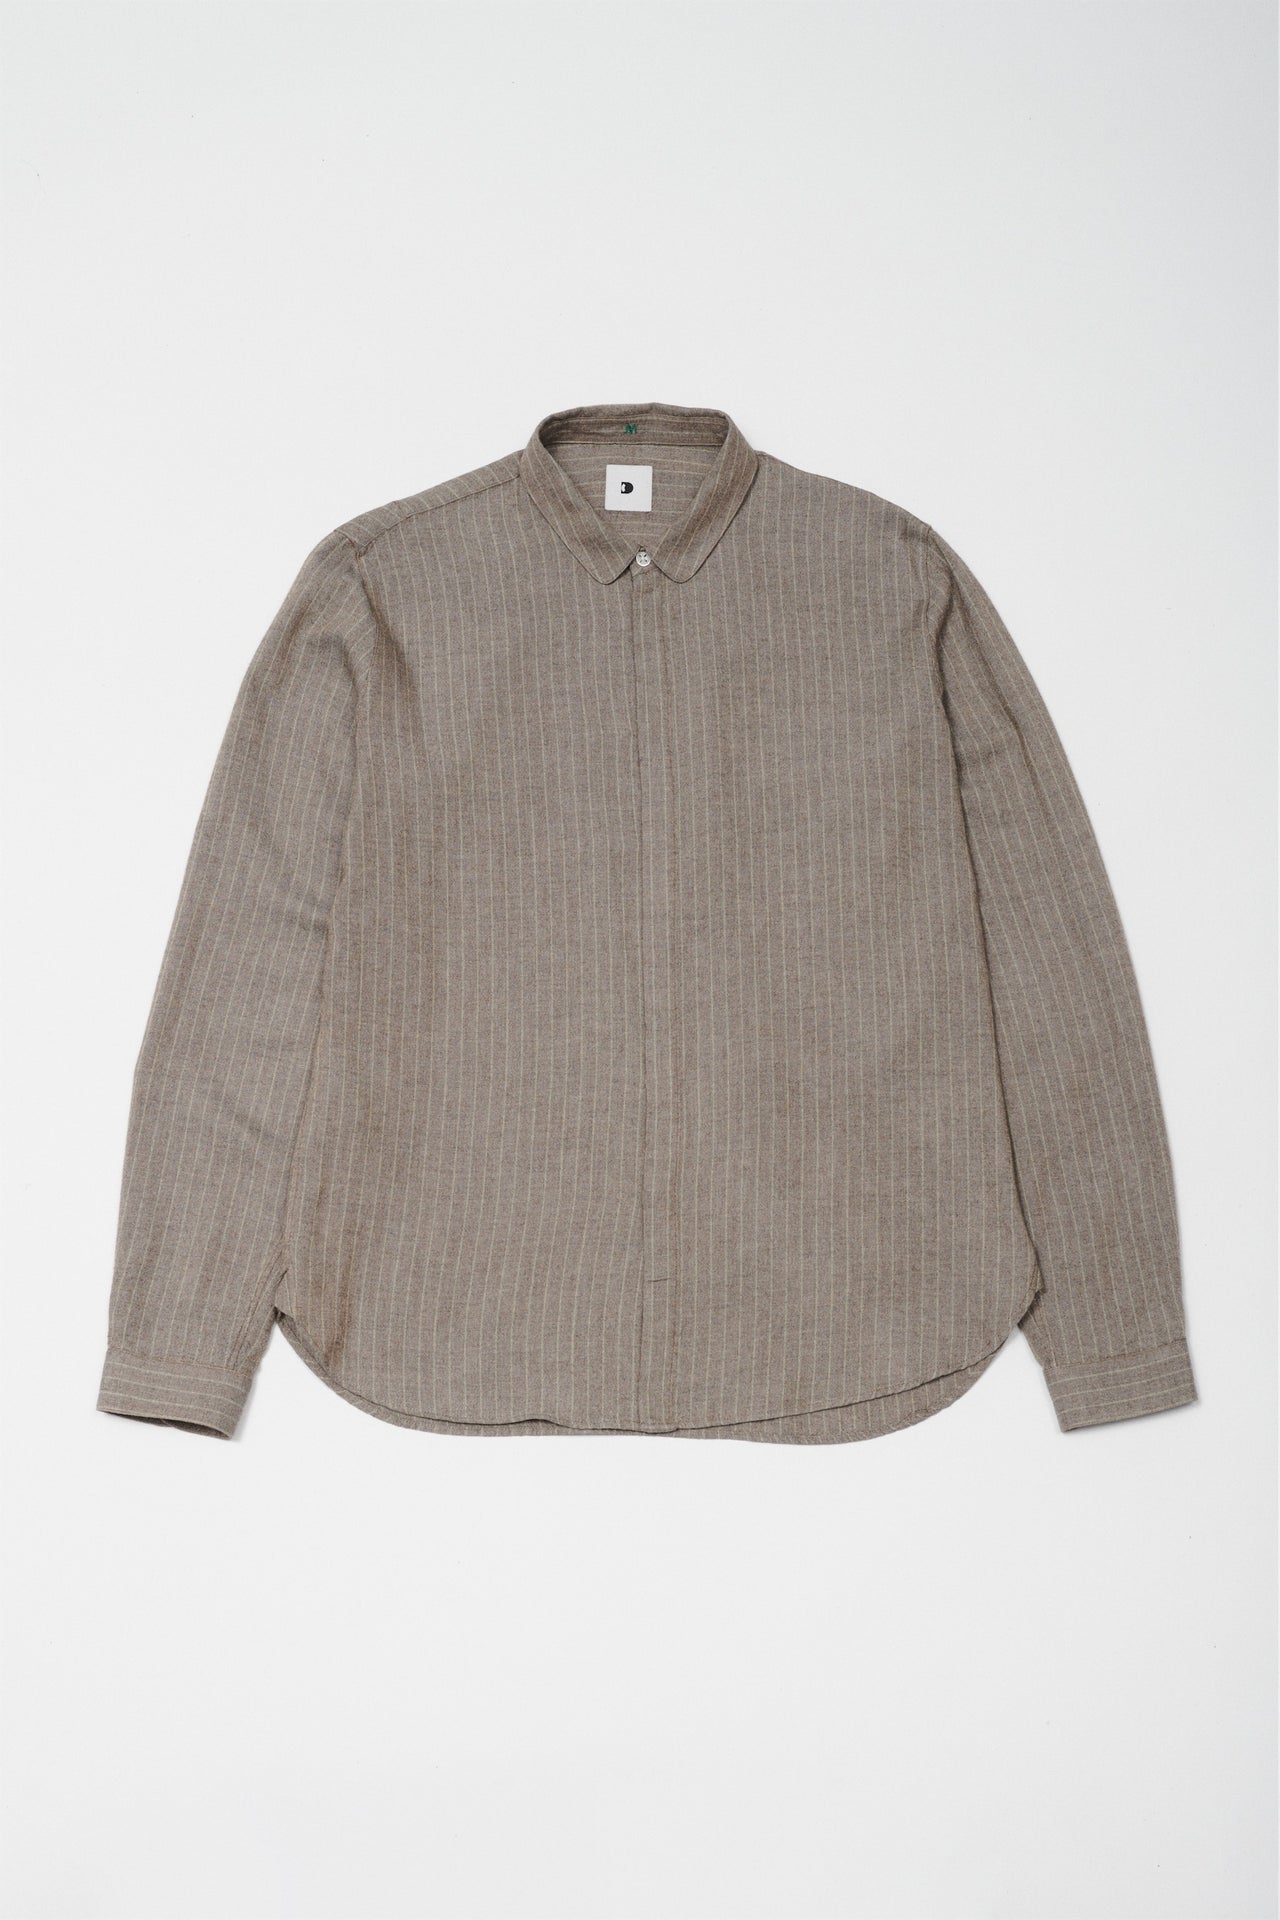 Cute Shirt in the Finest Mix of Portuguese Merino Wool and Modal